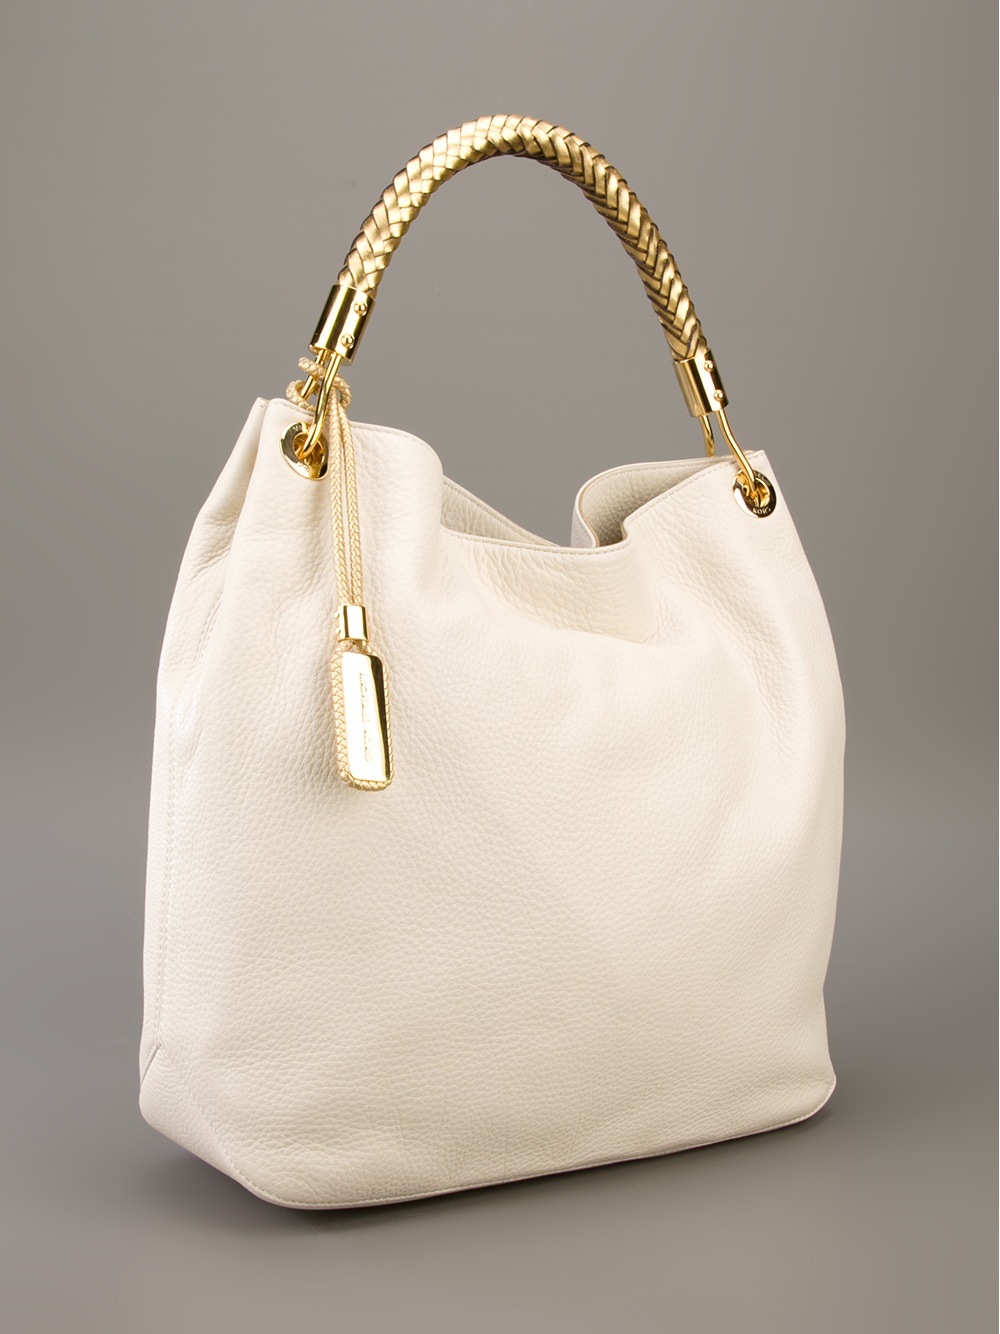 Lyst - Michael kors Braided Handle Tote in Natural